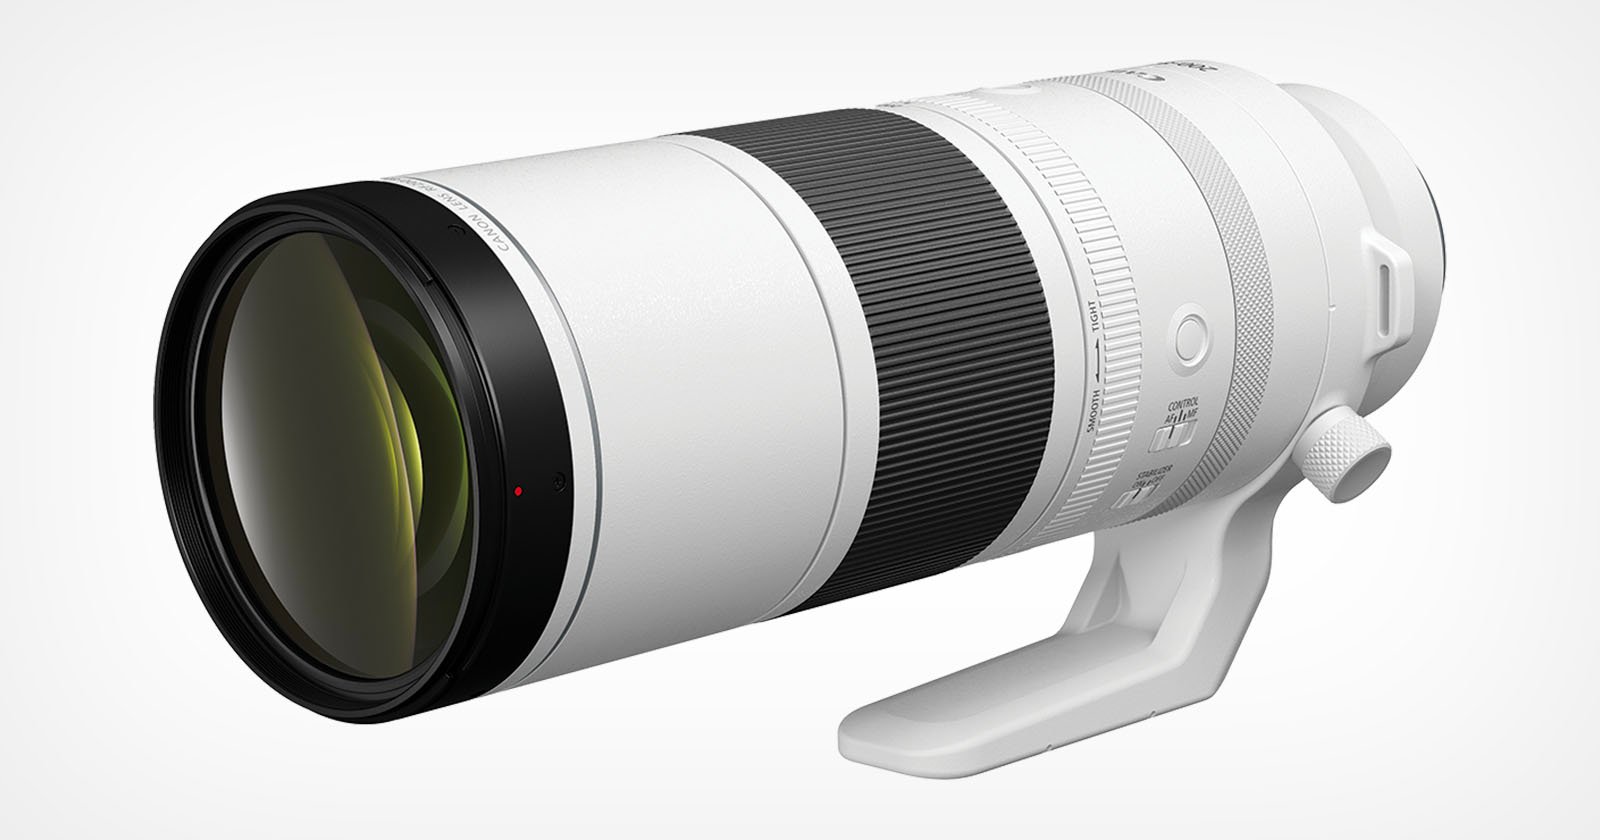  900 canon 200-800mm 3-9 lens delivers extreme reach 